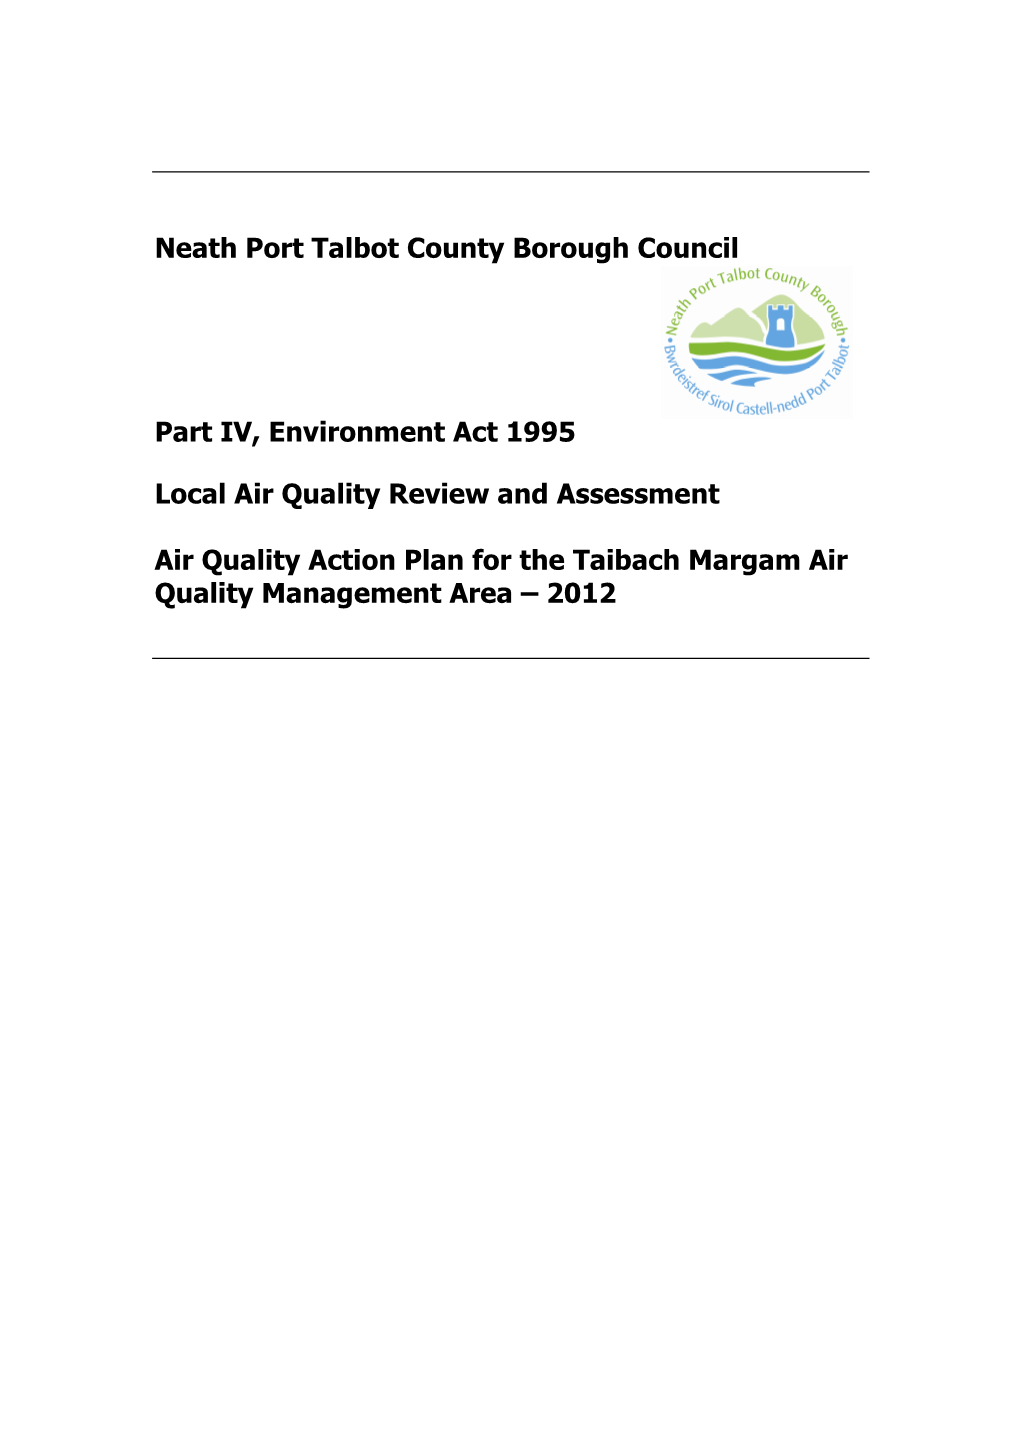 Air Quality Action Plan 2012